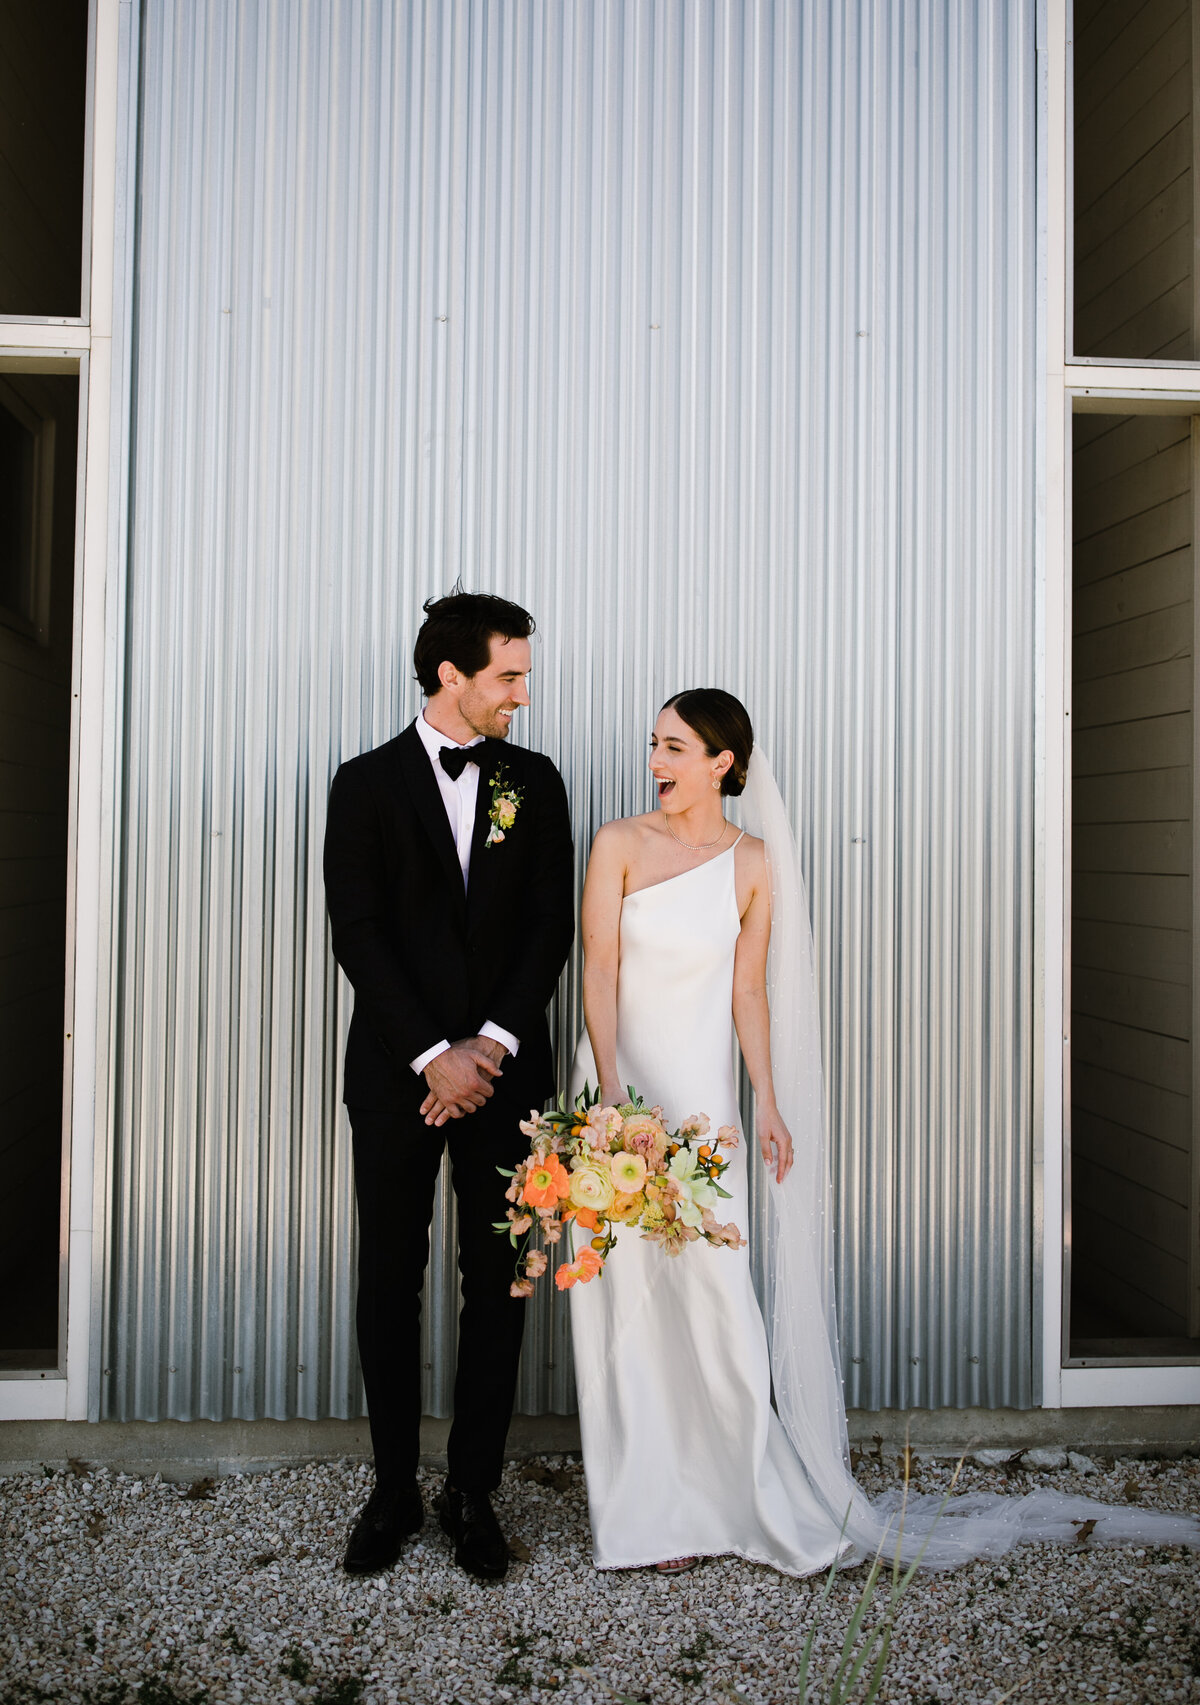 Bride and groom outside Prospect house, holding yellow and orange florals